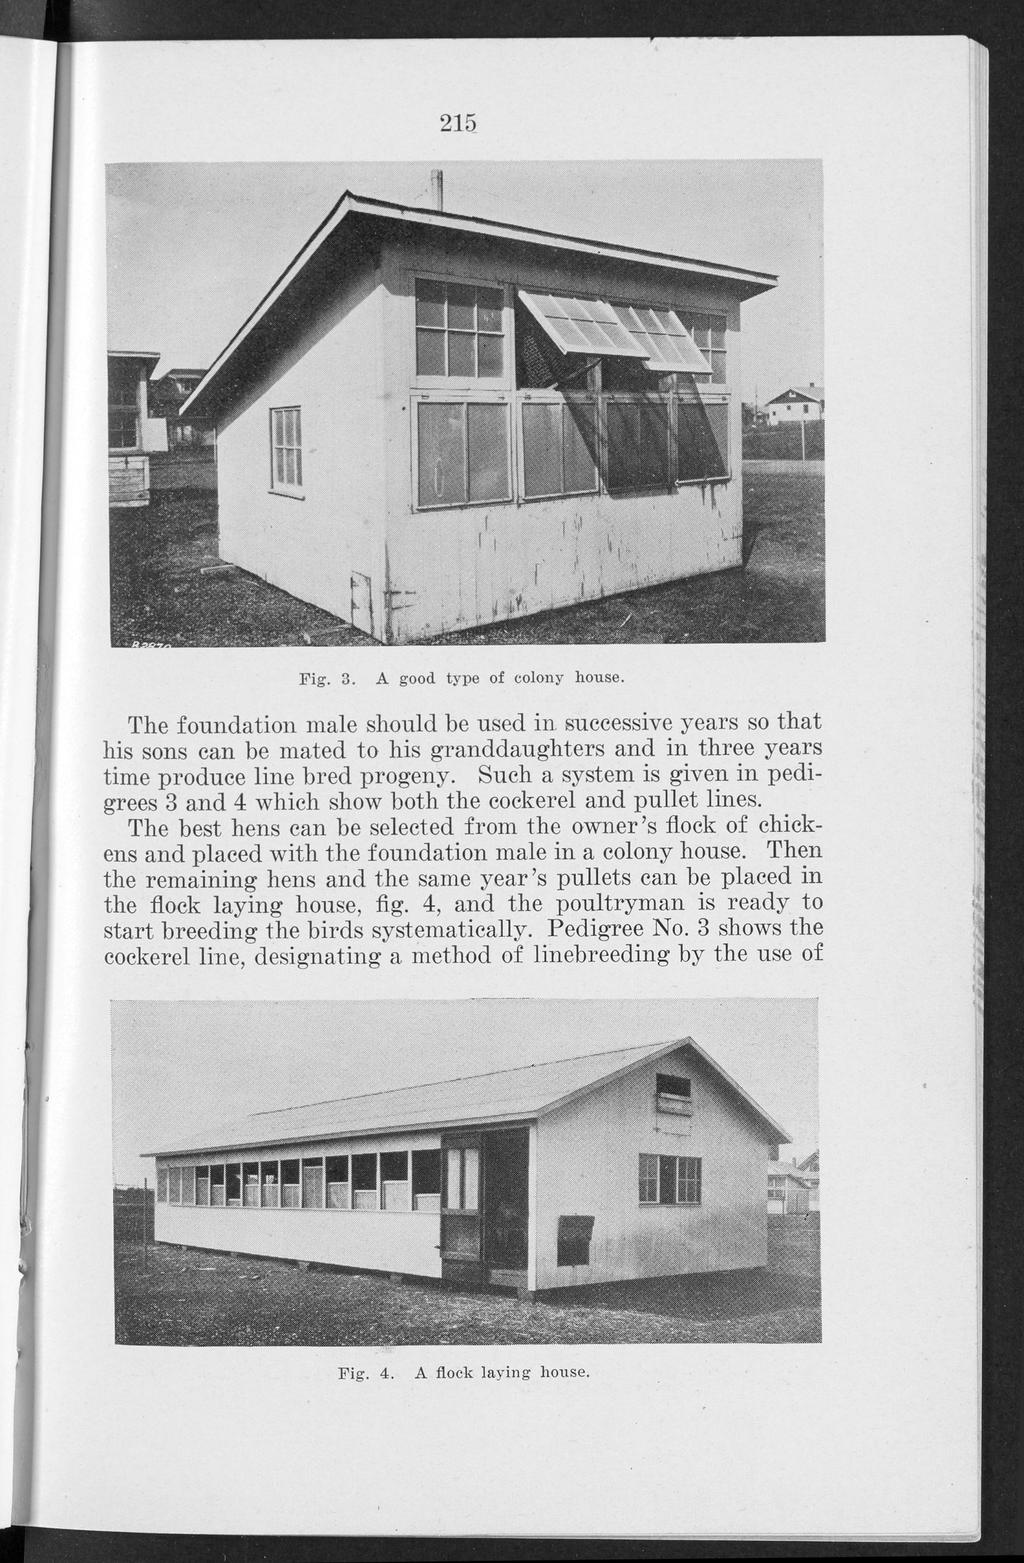 Knox: A simple linebreeding program for poultry breeders 215 Fig. 3. A good type of colony house.